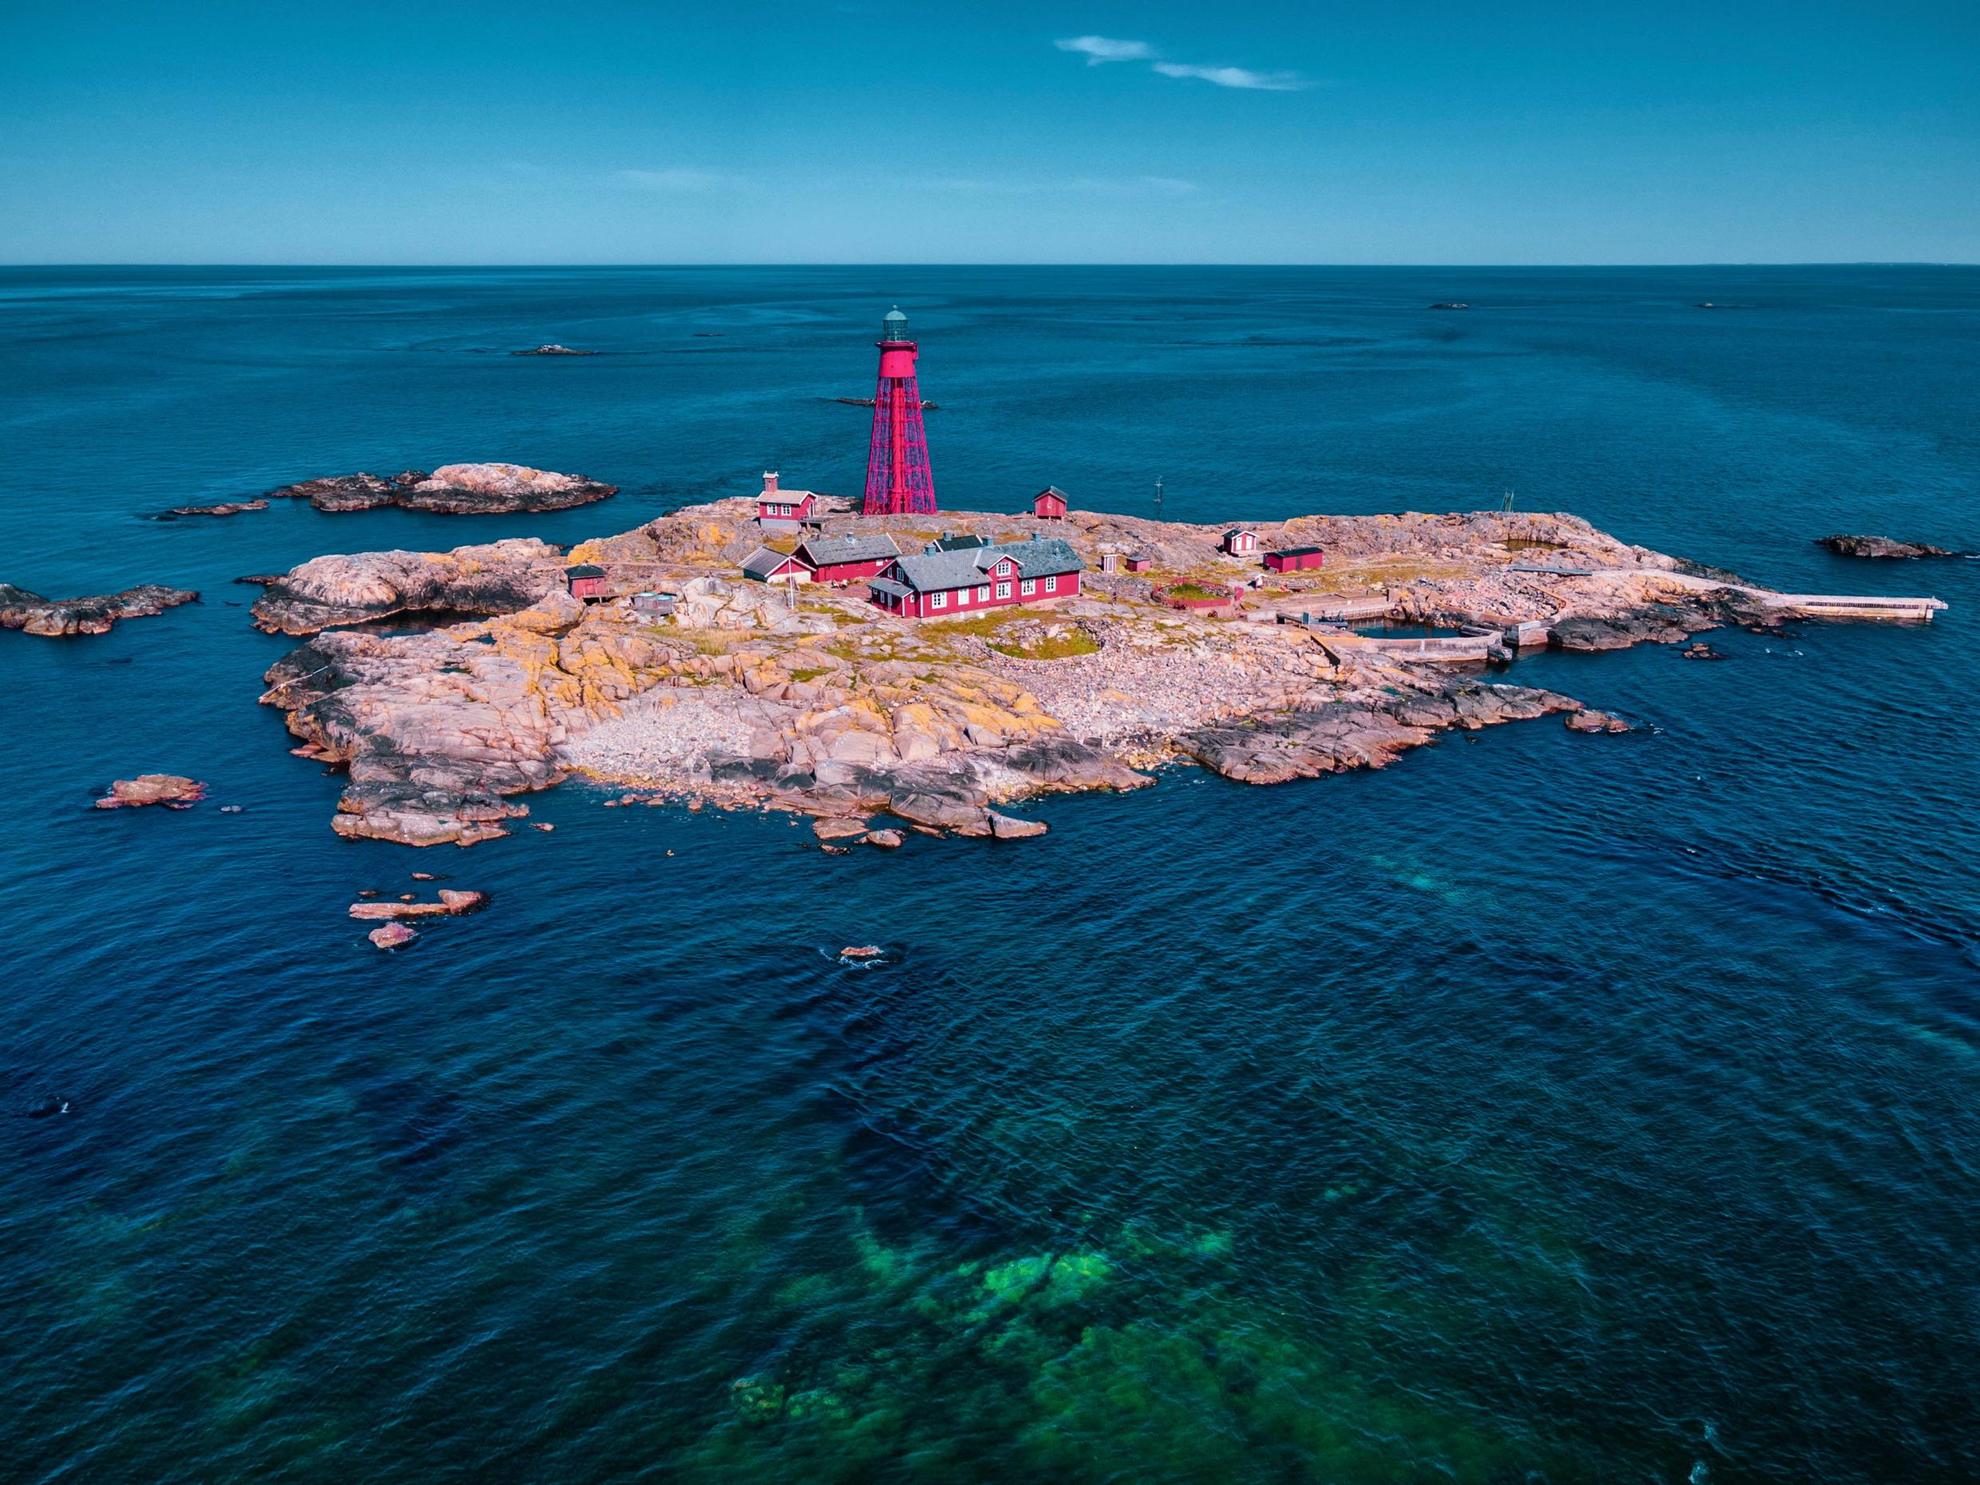 Aerial view of houses and a lighthouse on an small island in the archipelago.